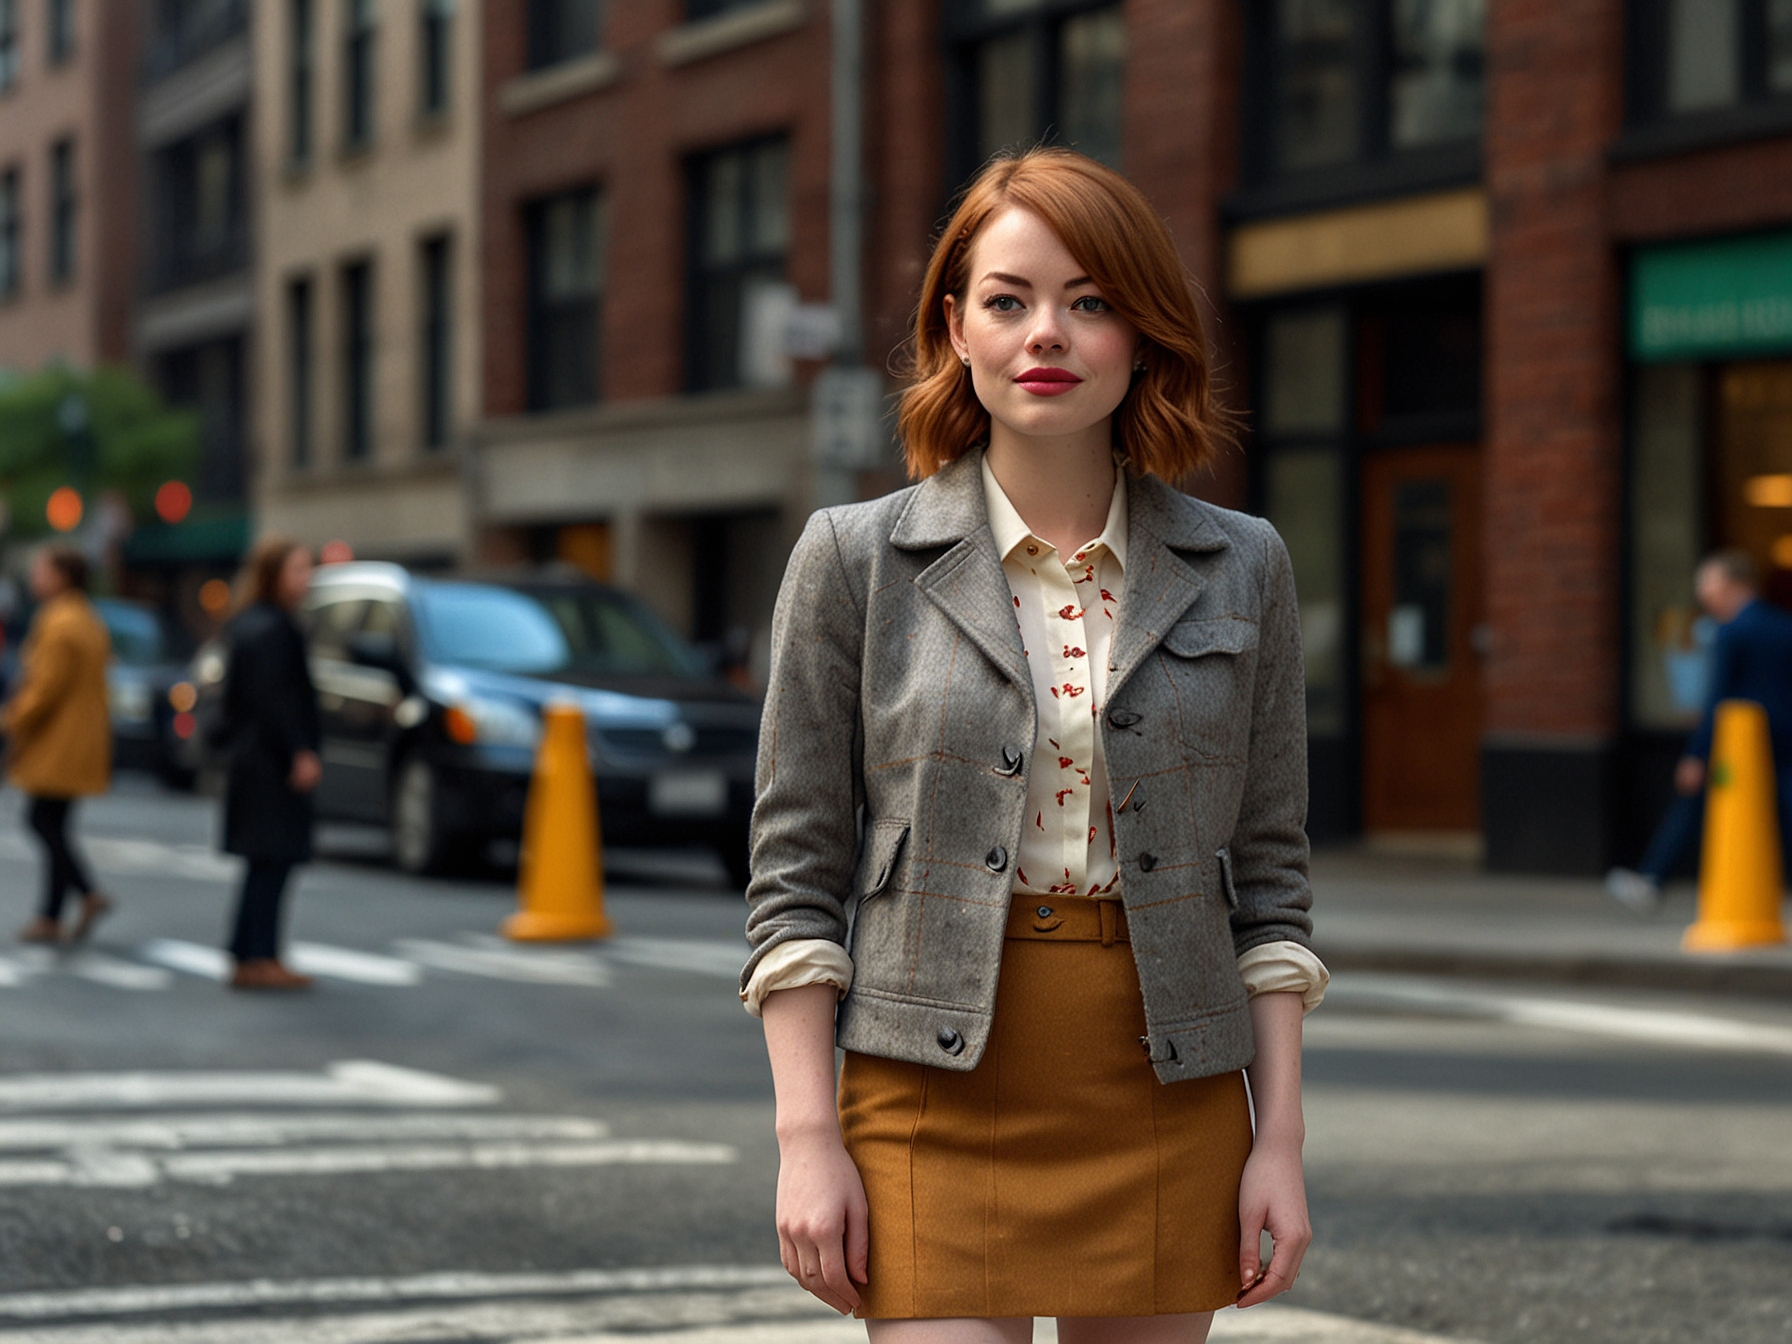 Emma Stone is seen on a bustling New York City street, wearing a sophisticated tweed miniskirt and matching jacket. The Oscar-winning actress exudes elegance as she promotes her new film, drawing admiring glances from passersby.